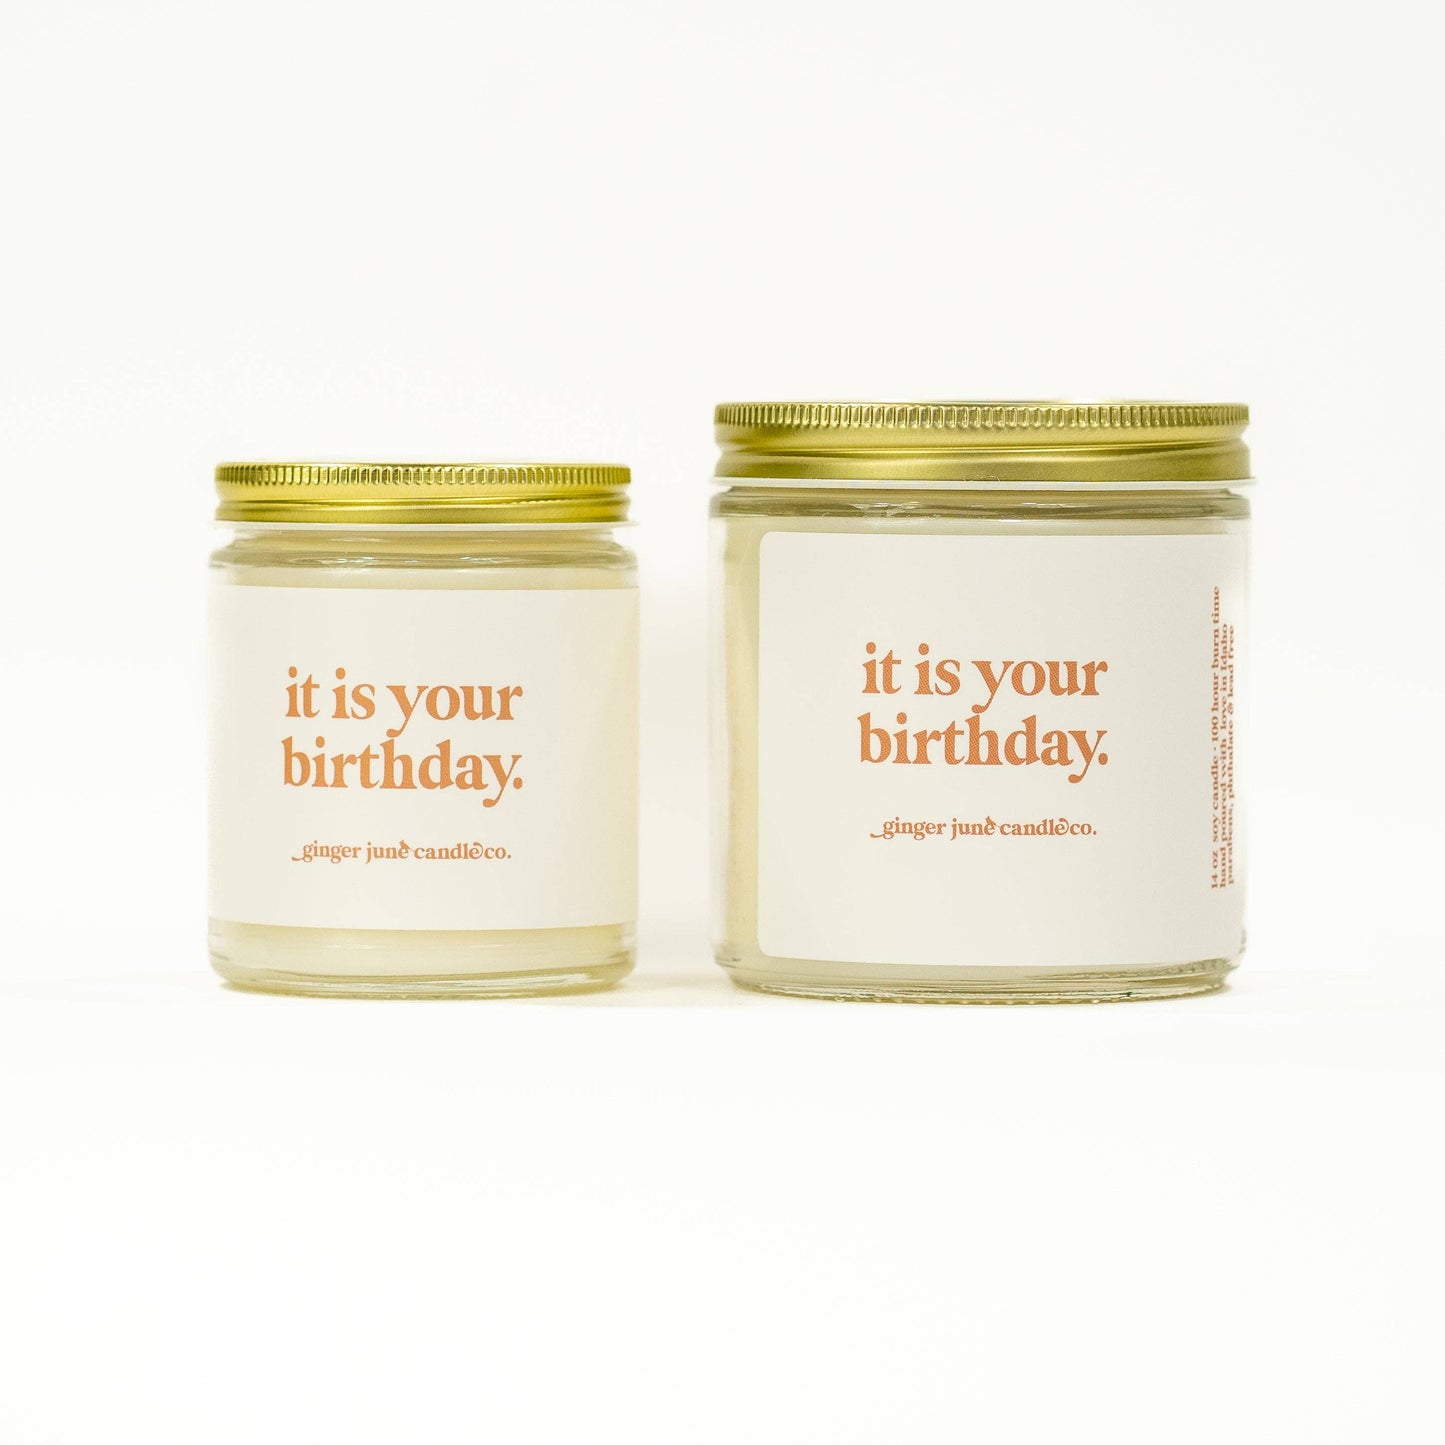 It is your birthday. • soy candle • 8 oz